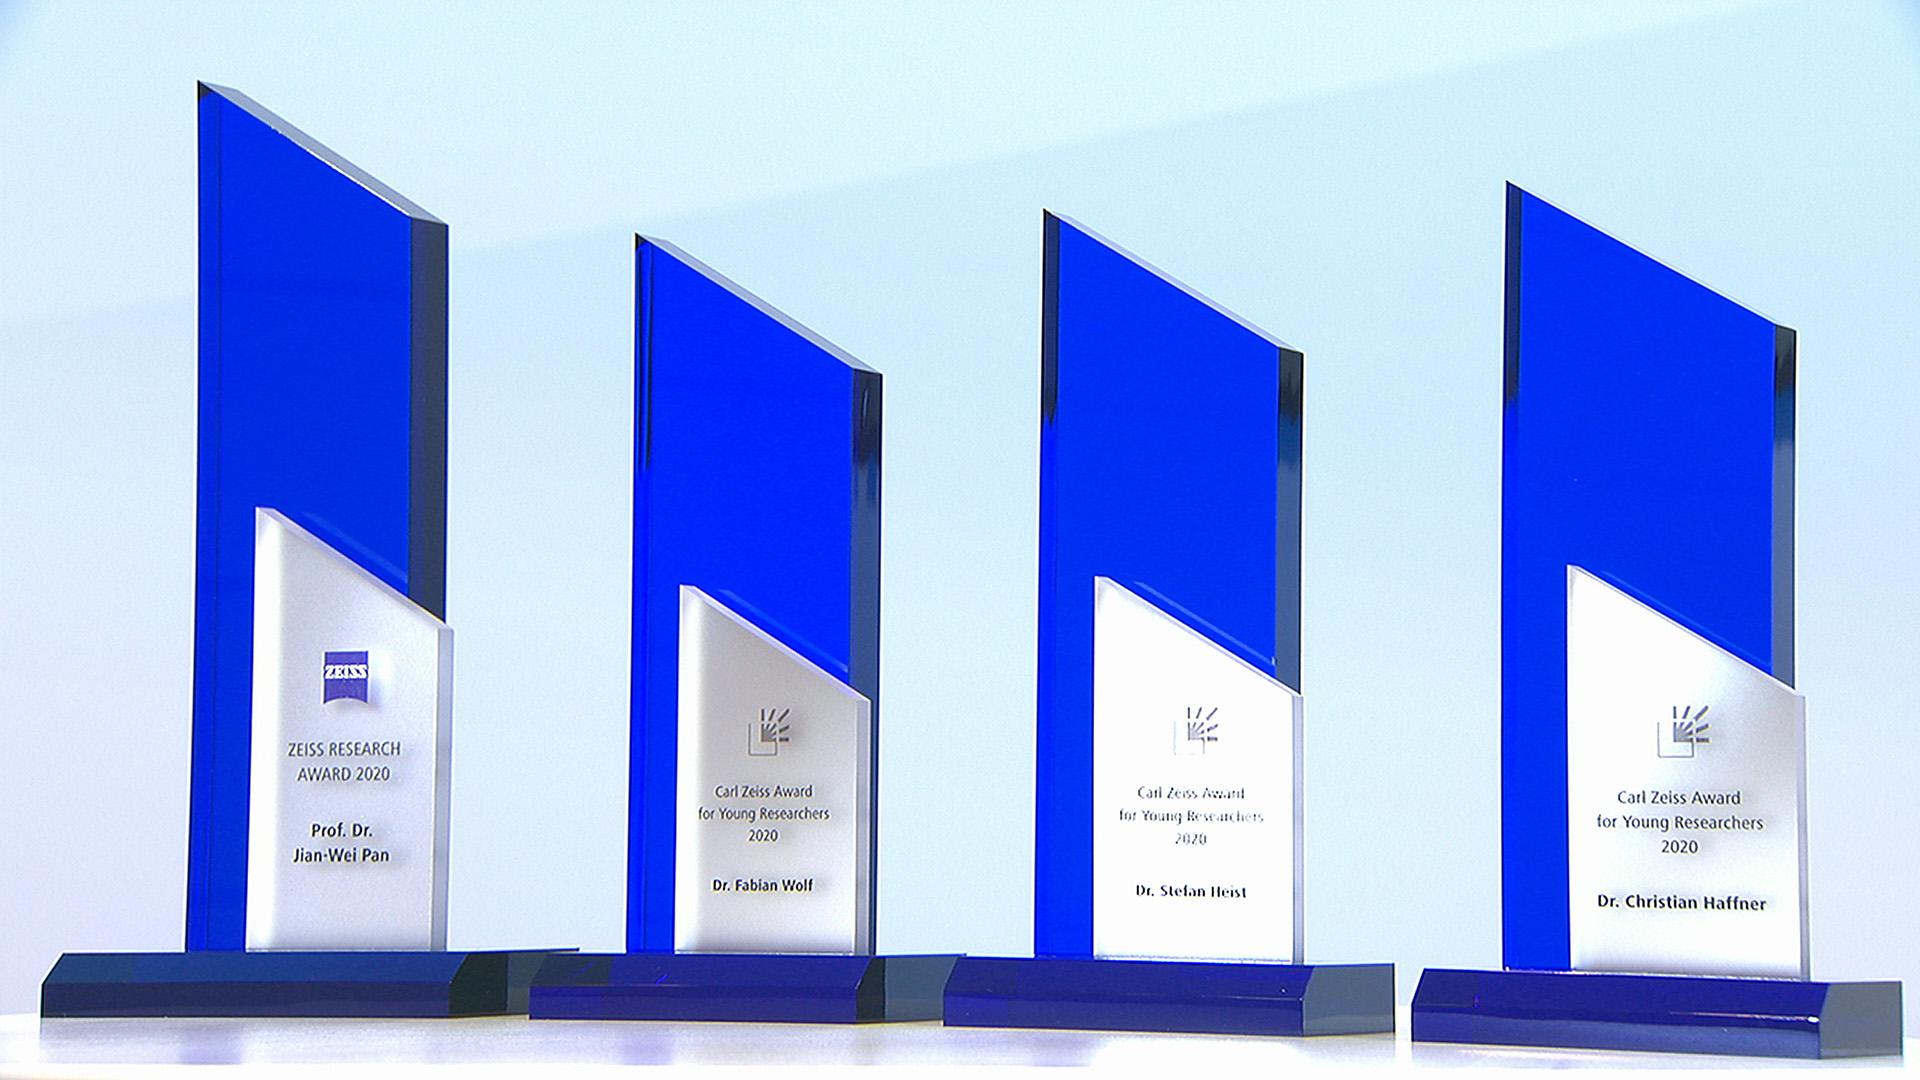 ZEISS Research Award und Carl Zeiss Award for Young Researchers